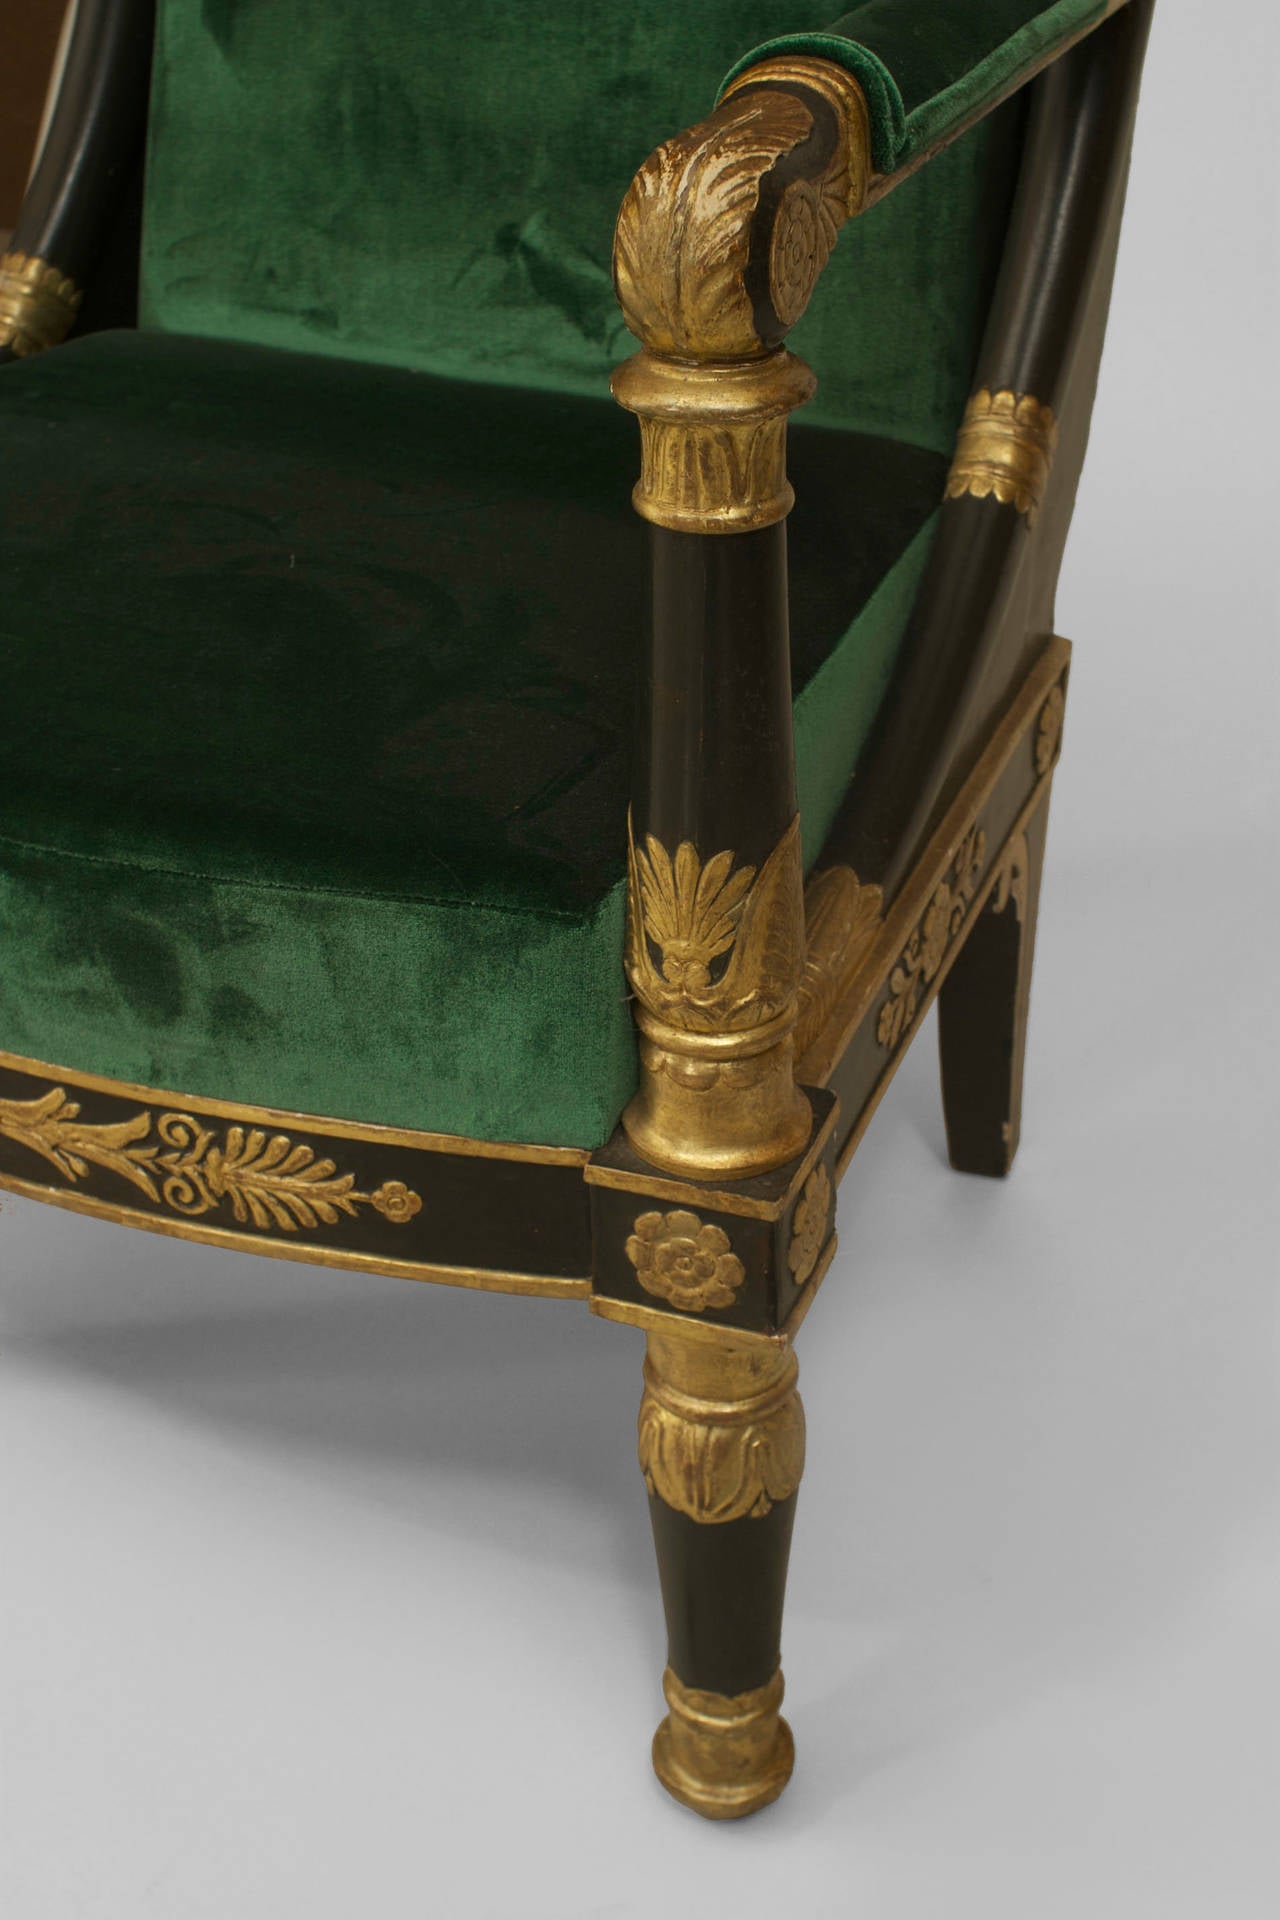 Pair of Late 18th or Early 19th c. French Empire Gilt Carved Armchairs 1